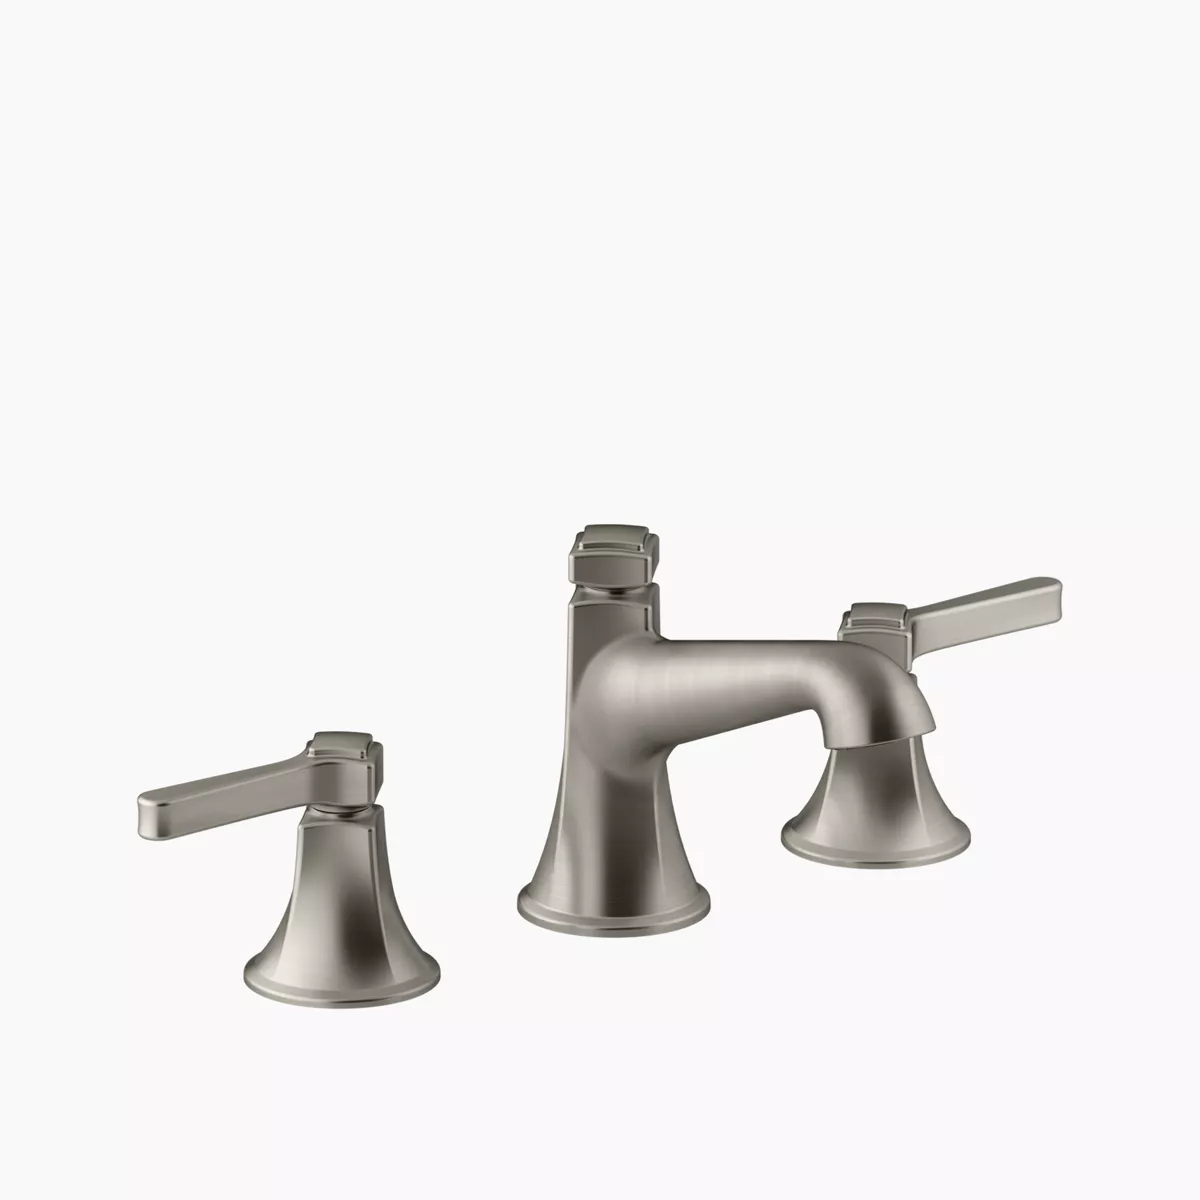 Shop Cleaners - Faucet, Tub, Shower, Stainless Steel & More